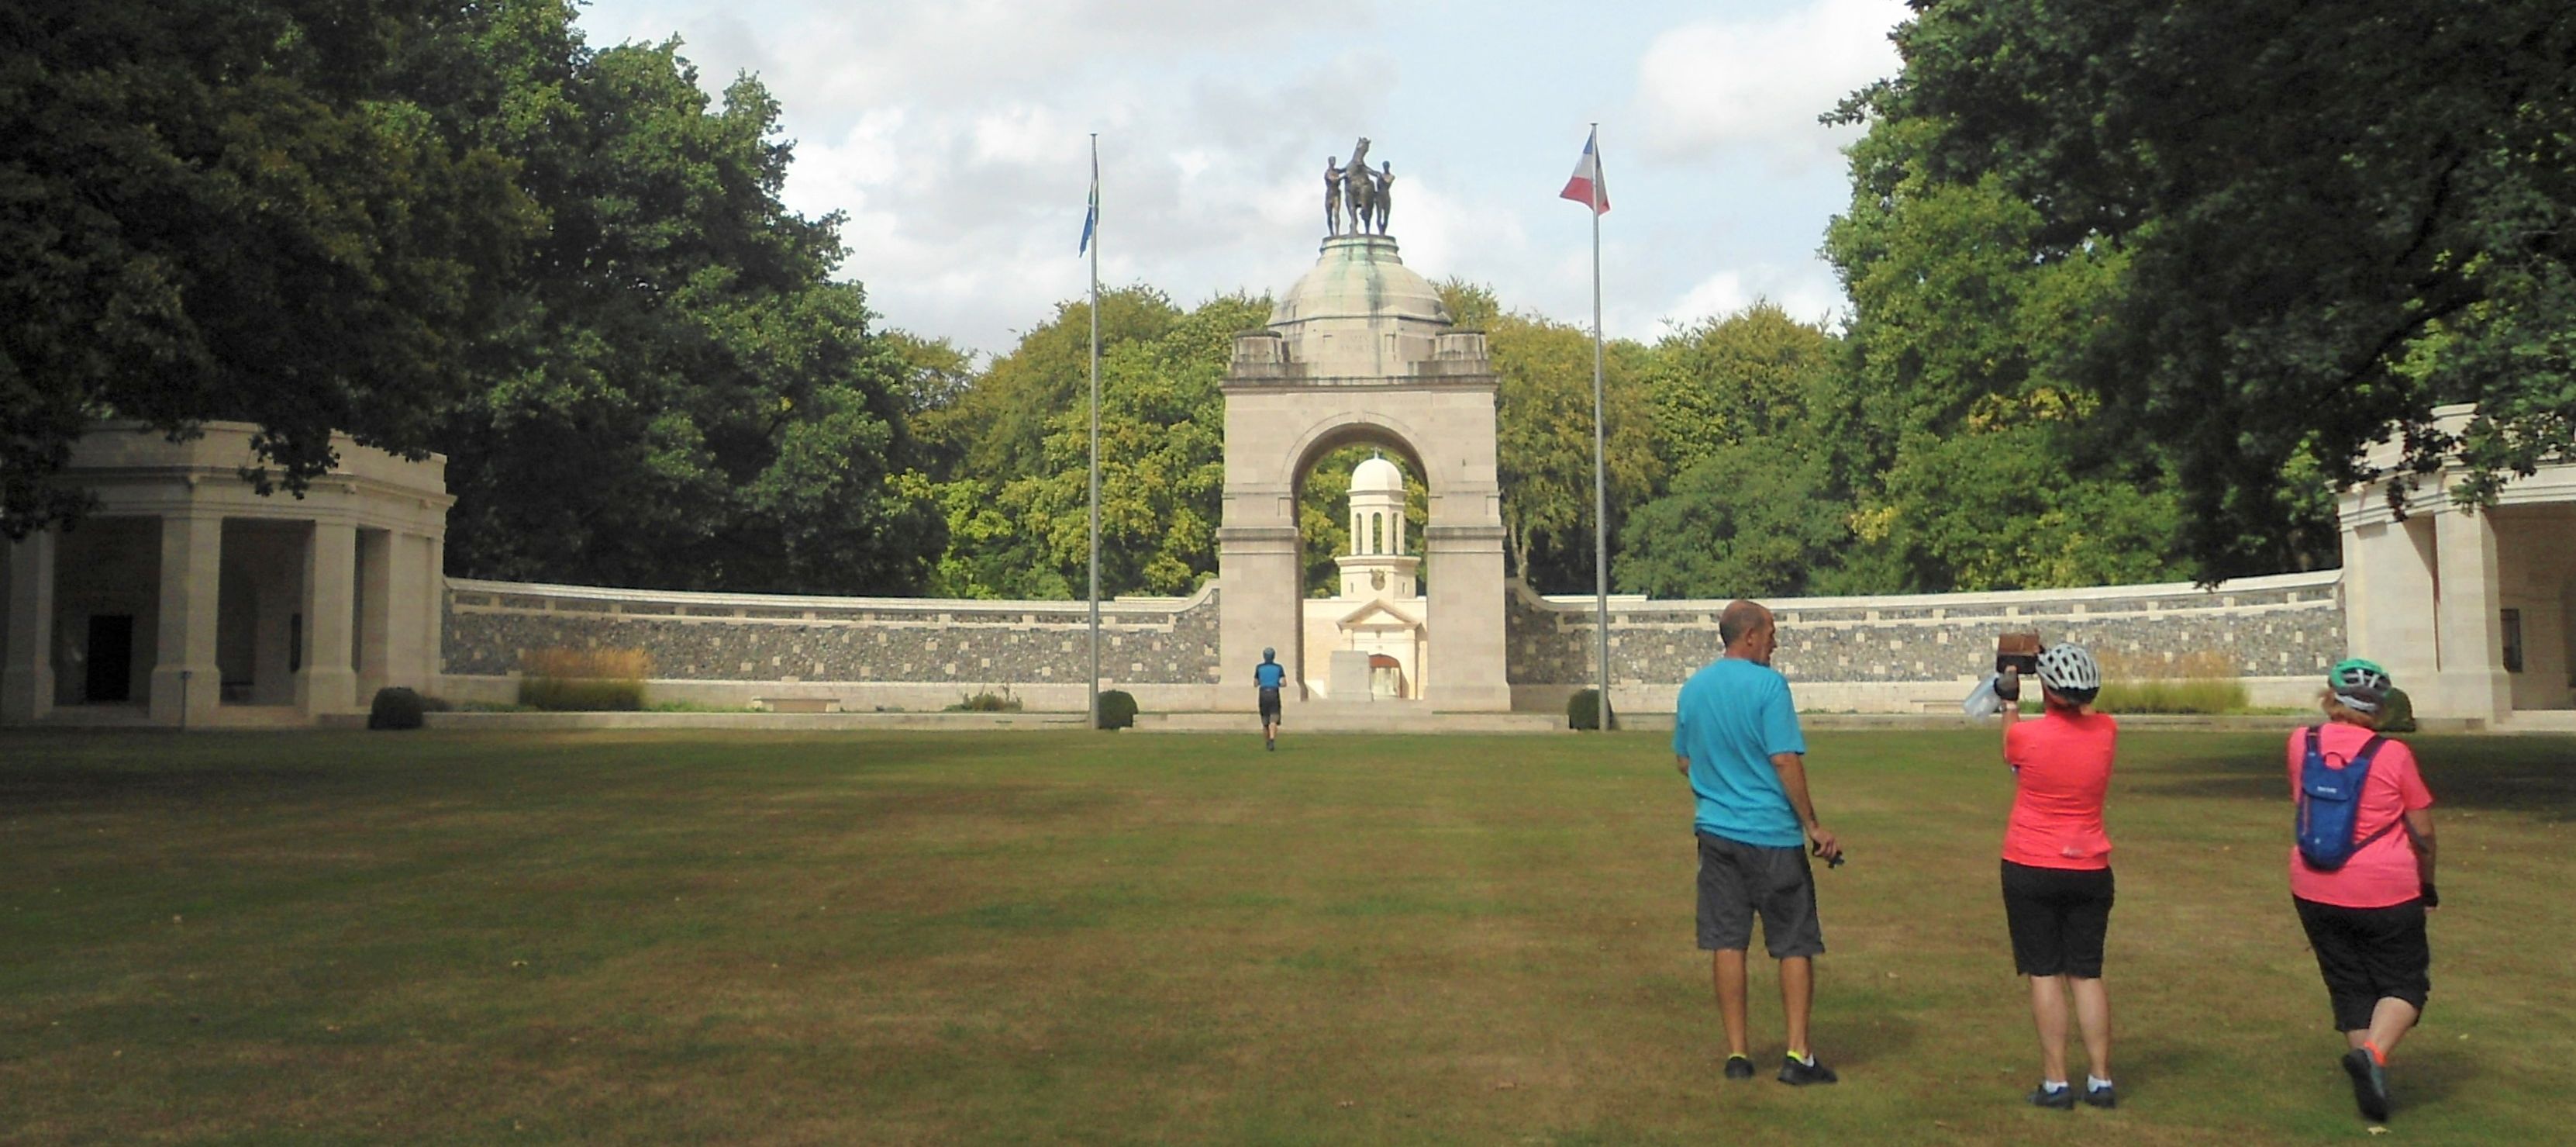 Delville Wood South African Memorial